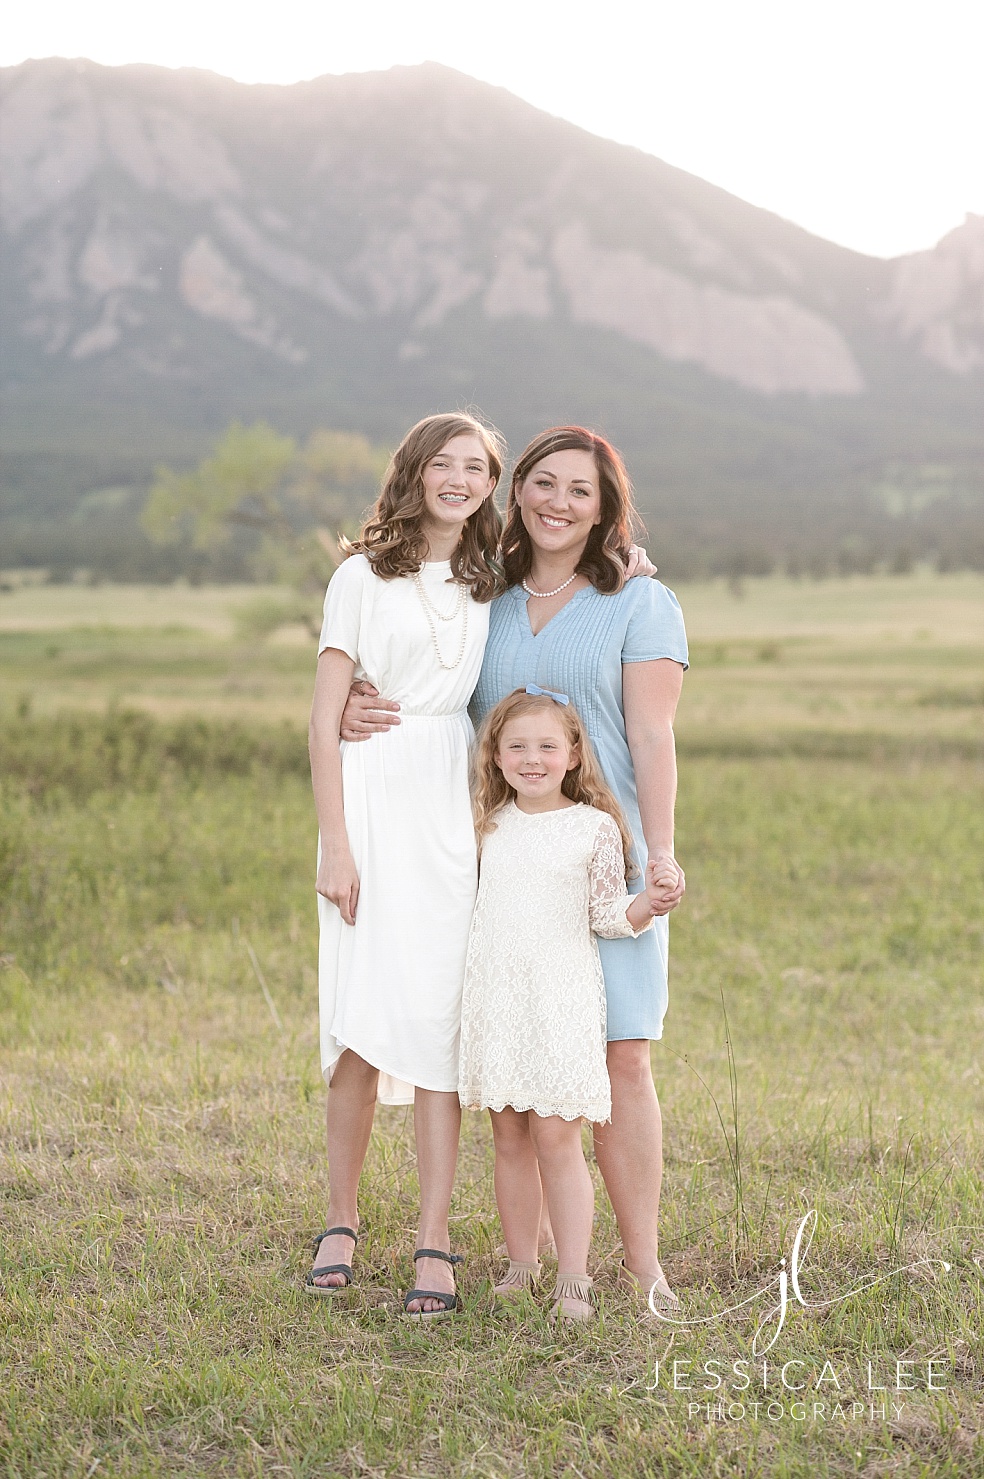 Family Photographer Boulder | Jessica Lee Photography